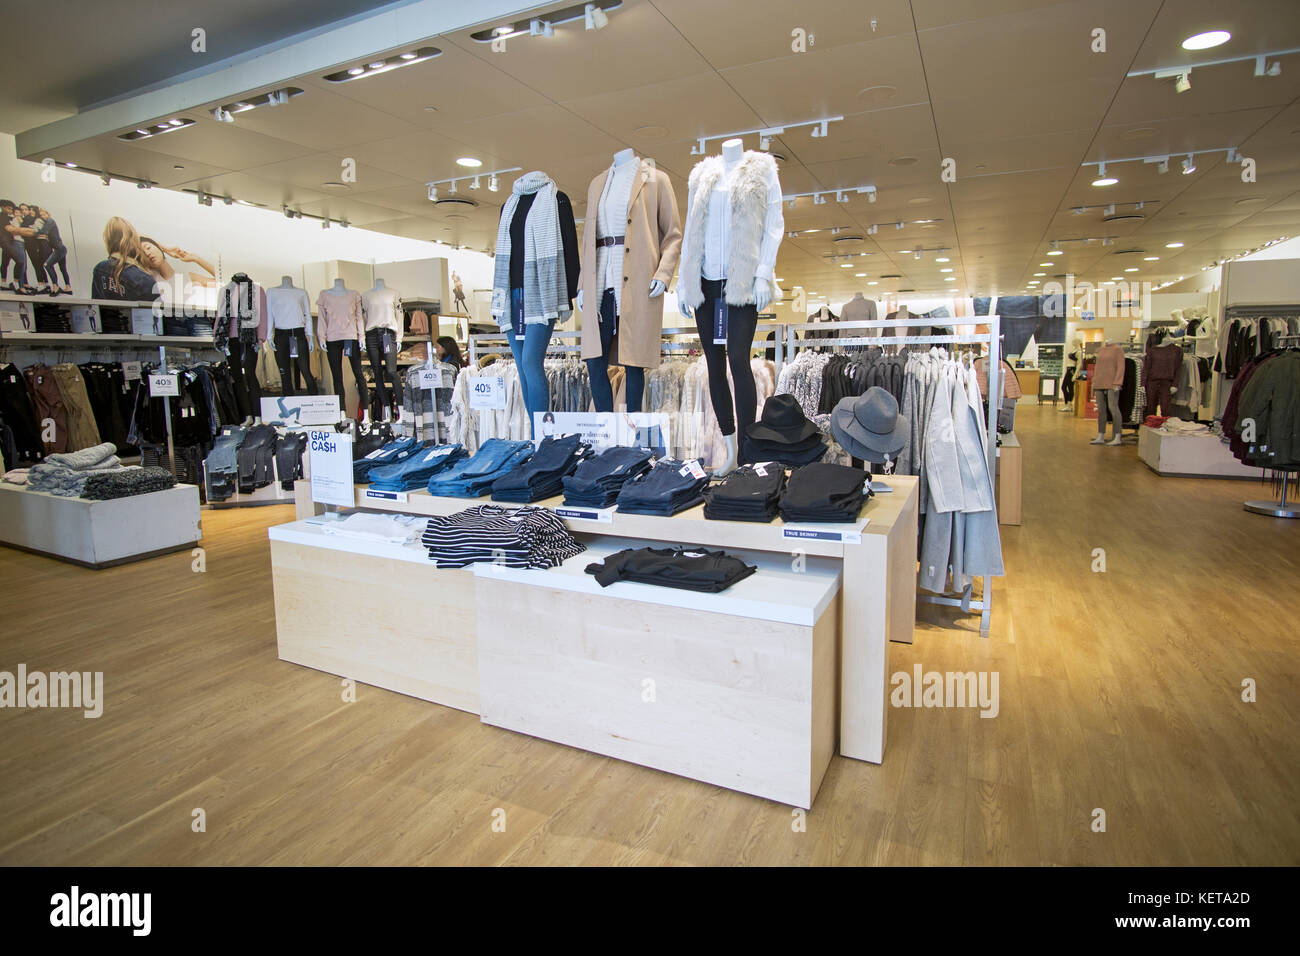 Inside the GAP store on Walnut Street in the Shadyside section of Pittsburgh, Pennsylvania Stock Photo